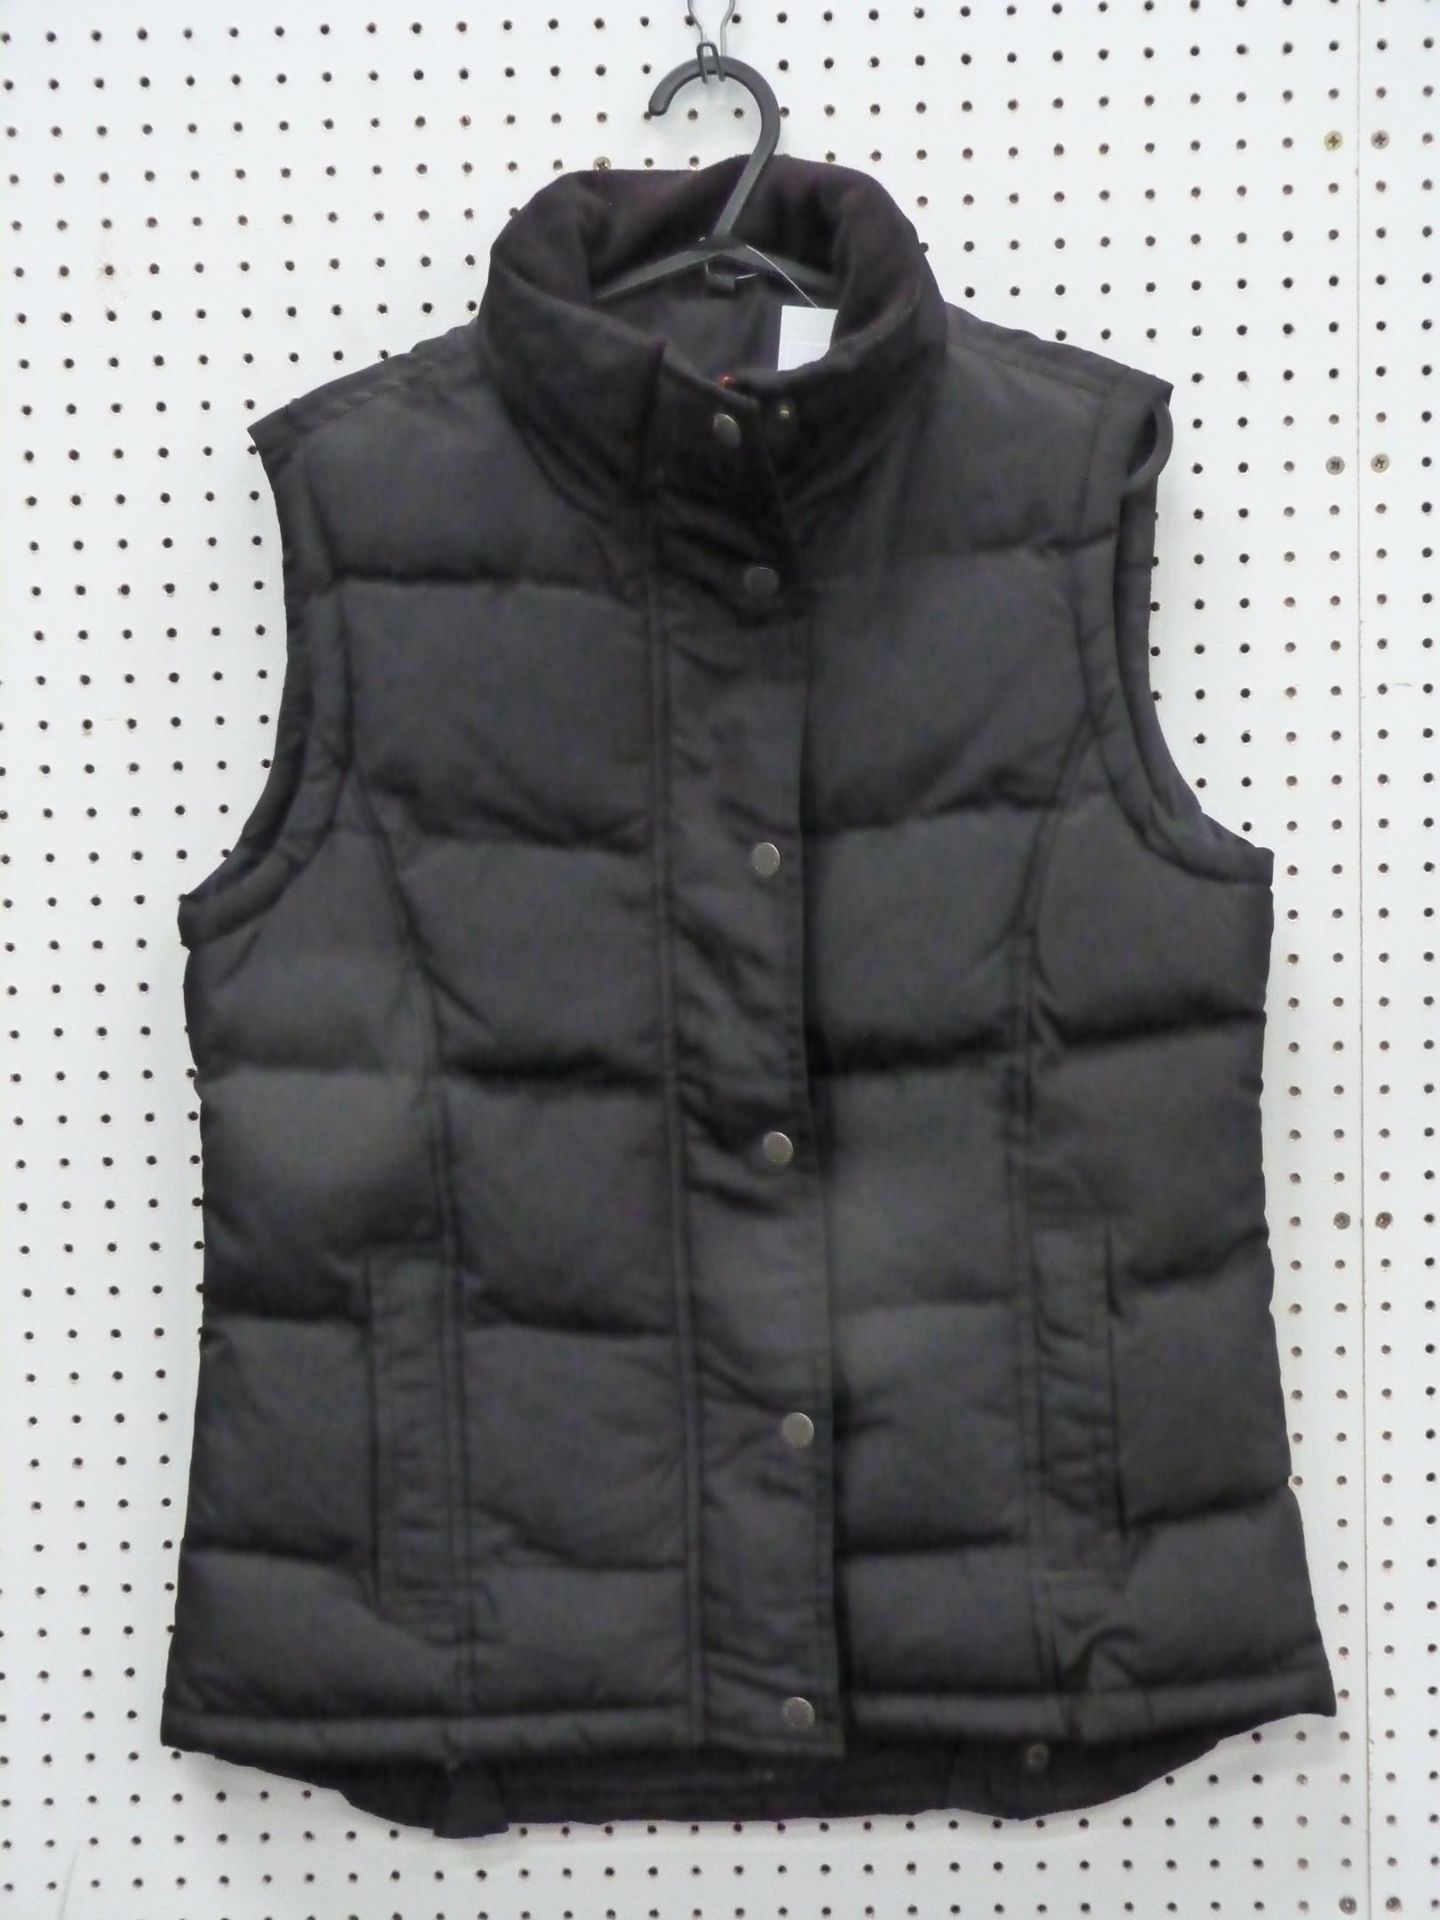 * Two Ladies 'Bridleway' Padded Gilets in Black; one X Small, one Medium together with a Shires